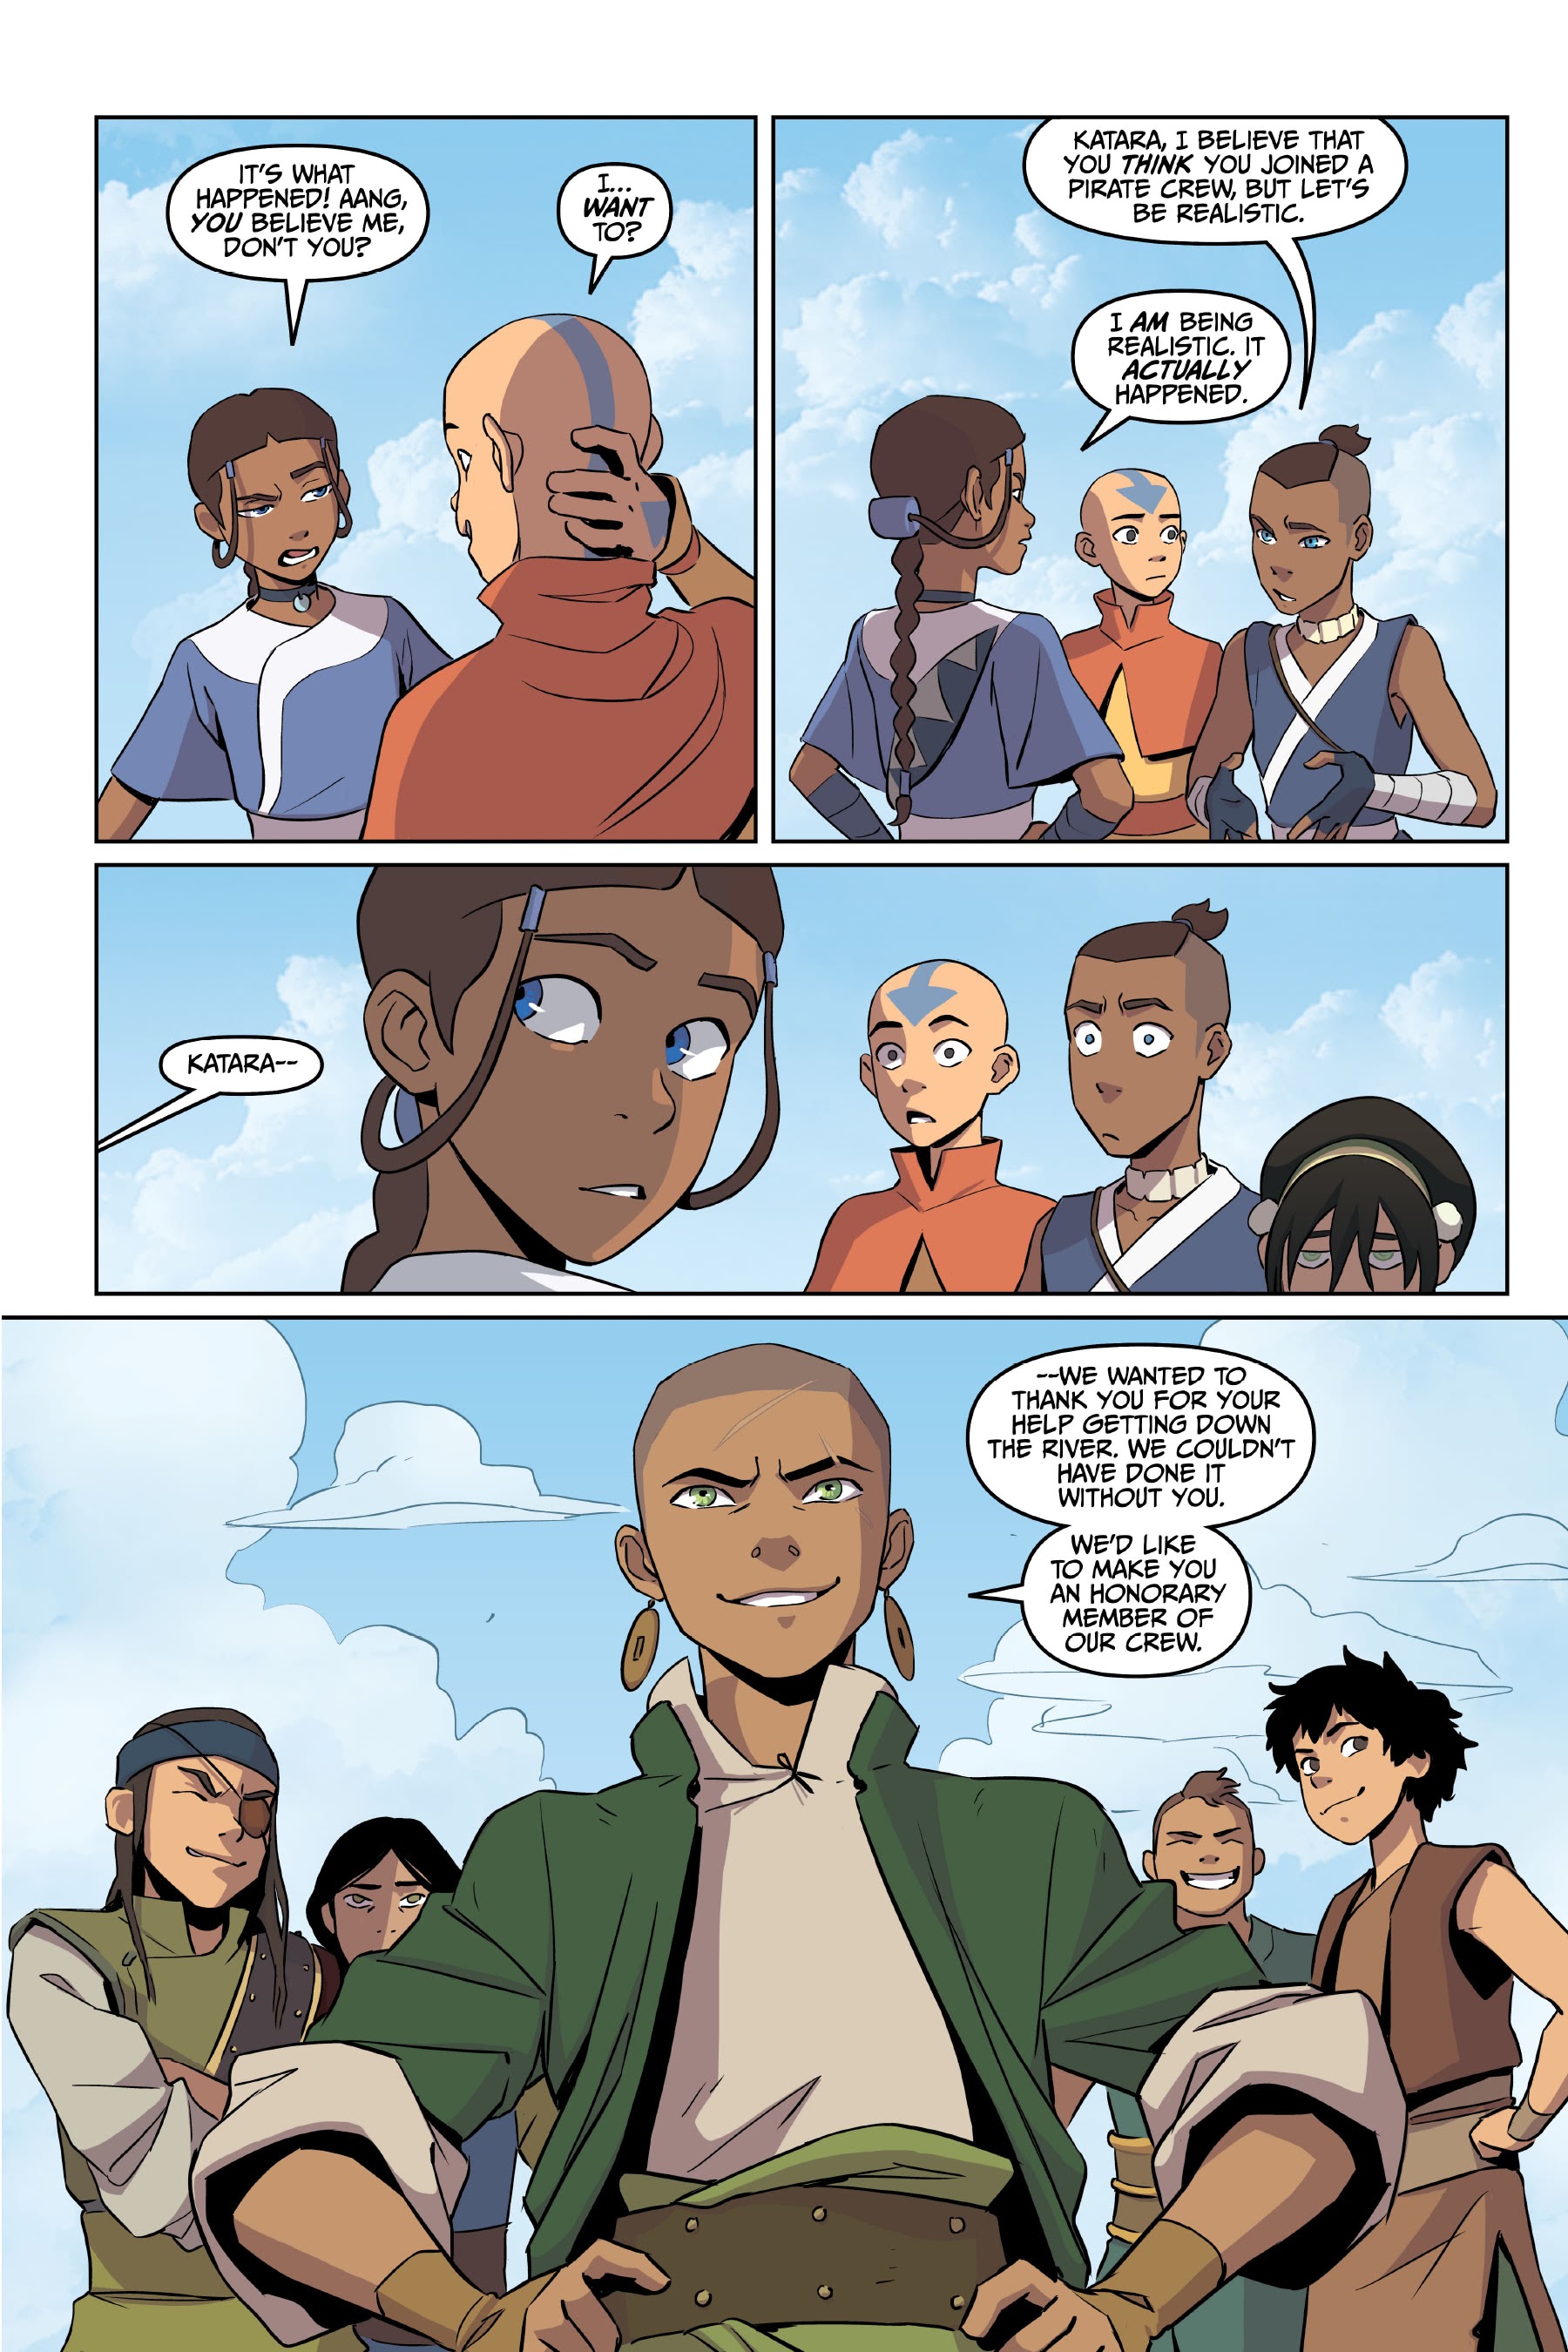 Read online Avatar: The Last Airbender—Katara and the Pirate's Silver comic -  Issue # TPB - 75